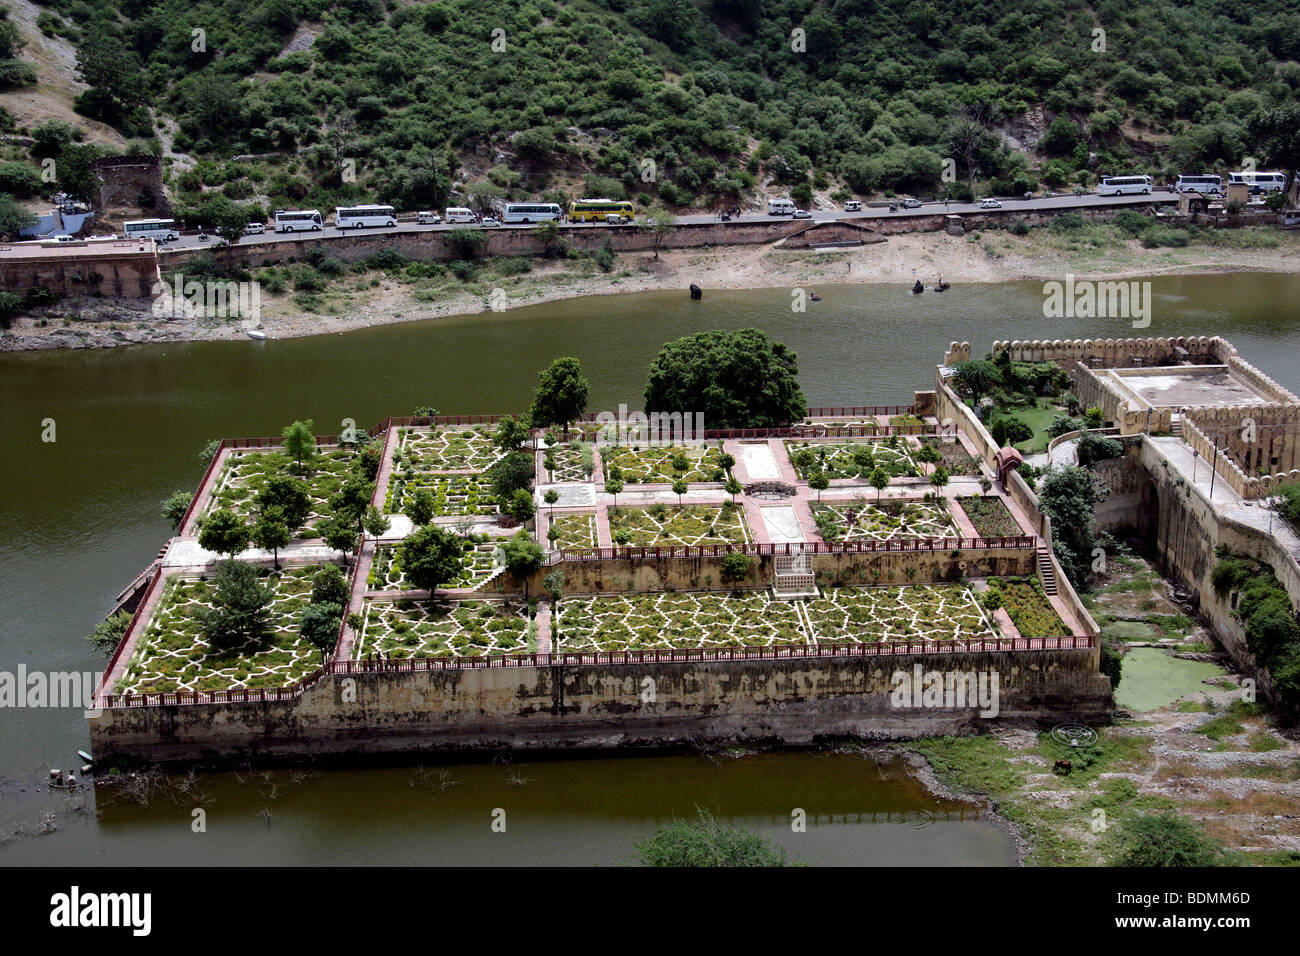 The palace gardens of the 16th Century fortress Fort Amber, Rajasthan, India Stock Photo